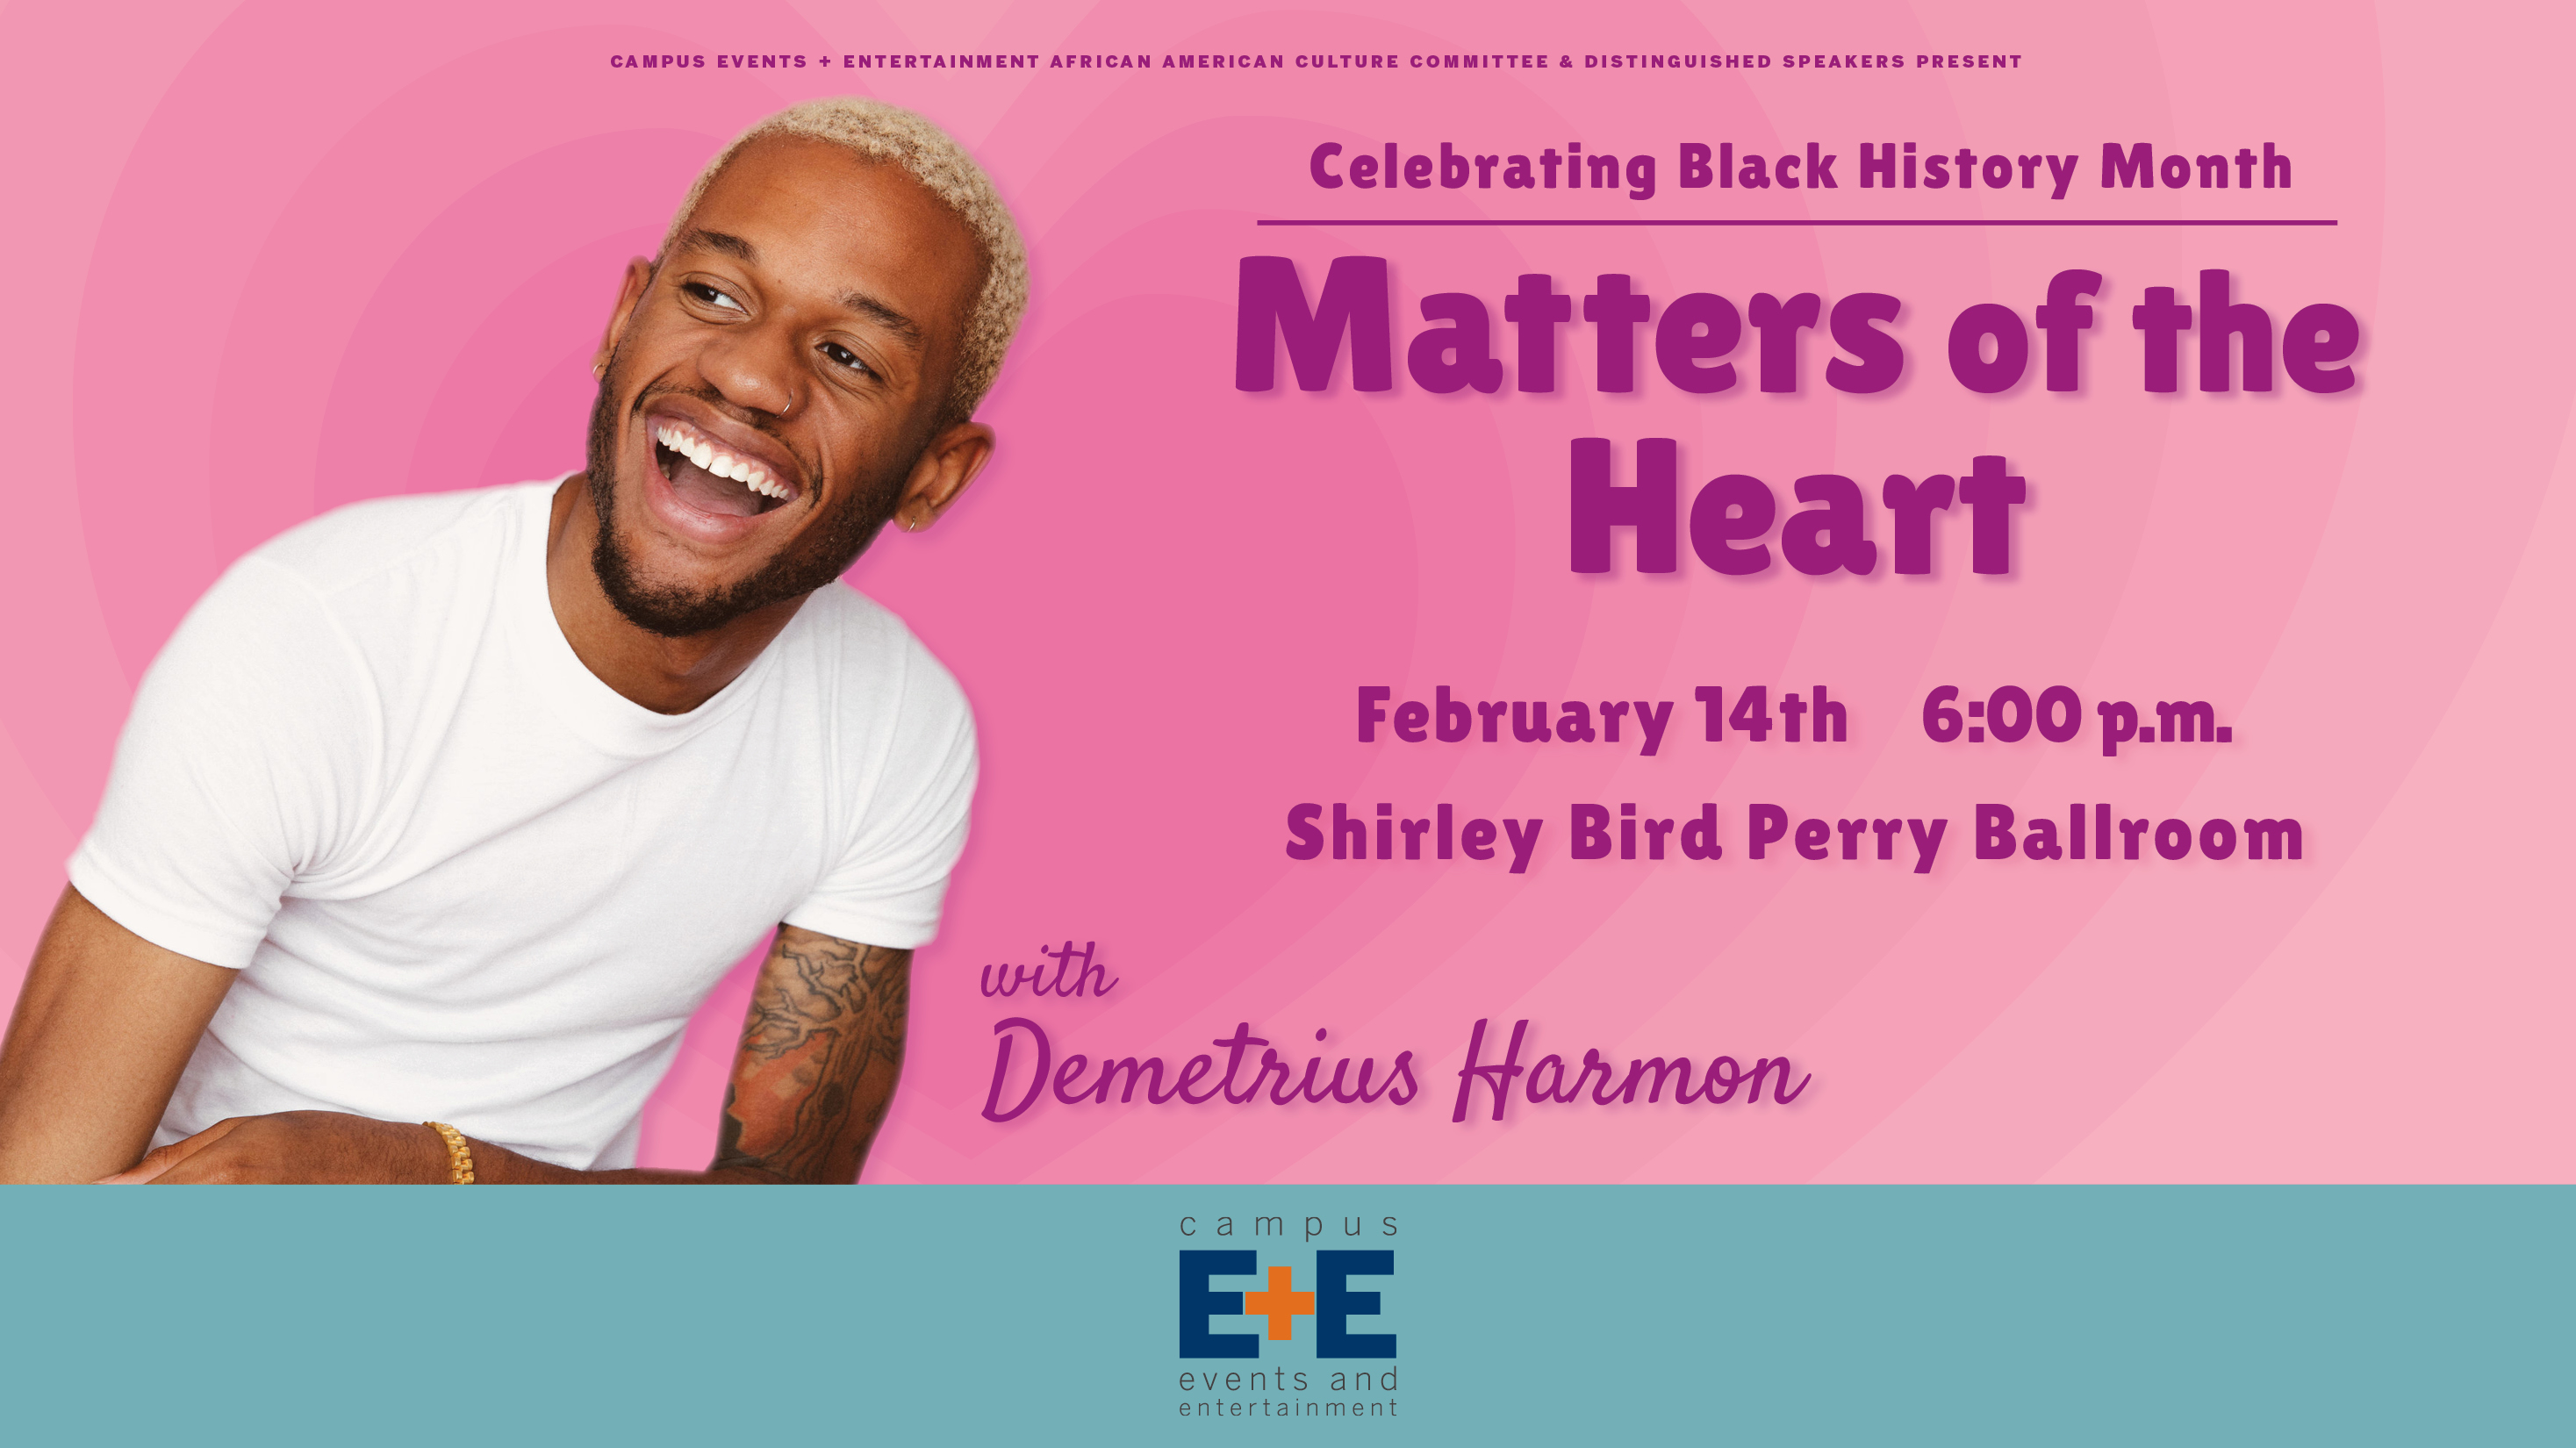 Pink background with darker pink text reading "Matters of the Heart" and image of Demetrius Harmon